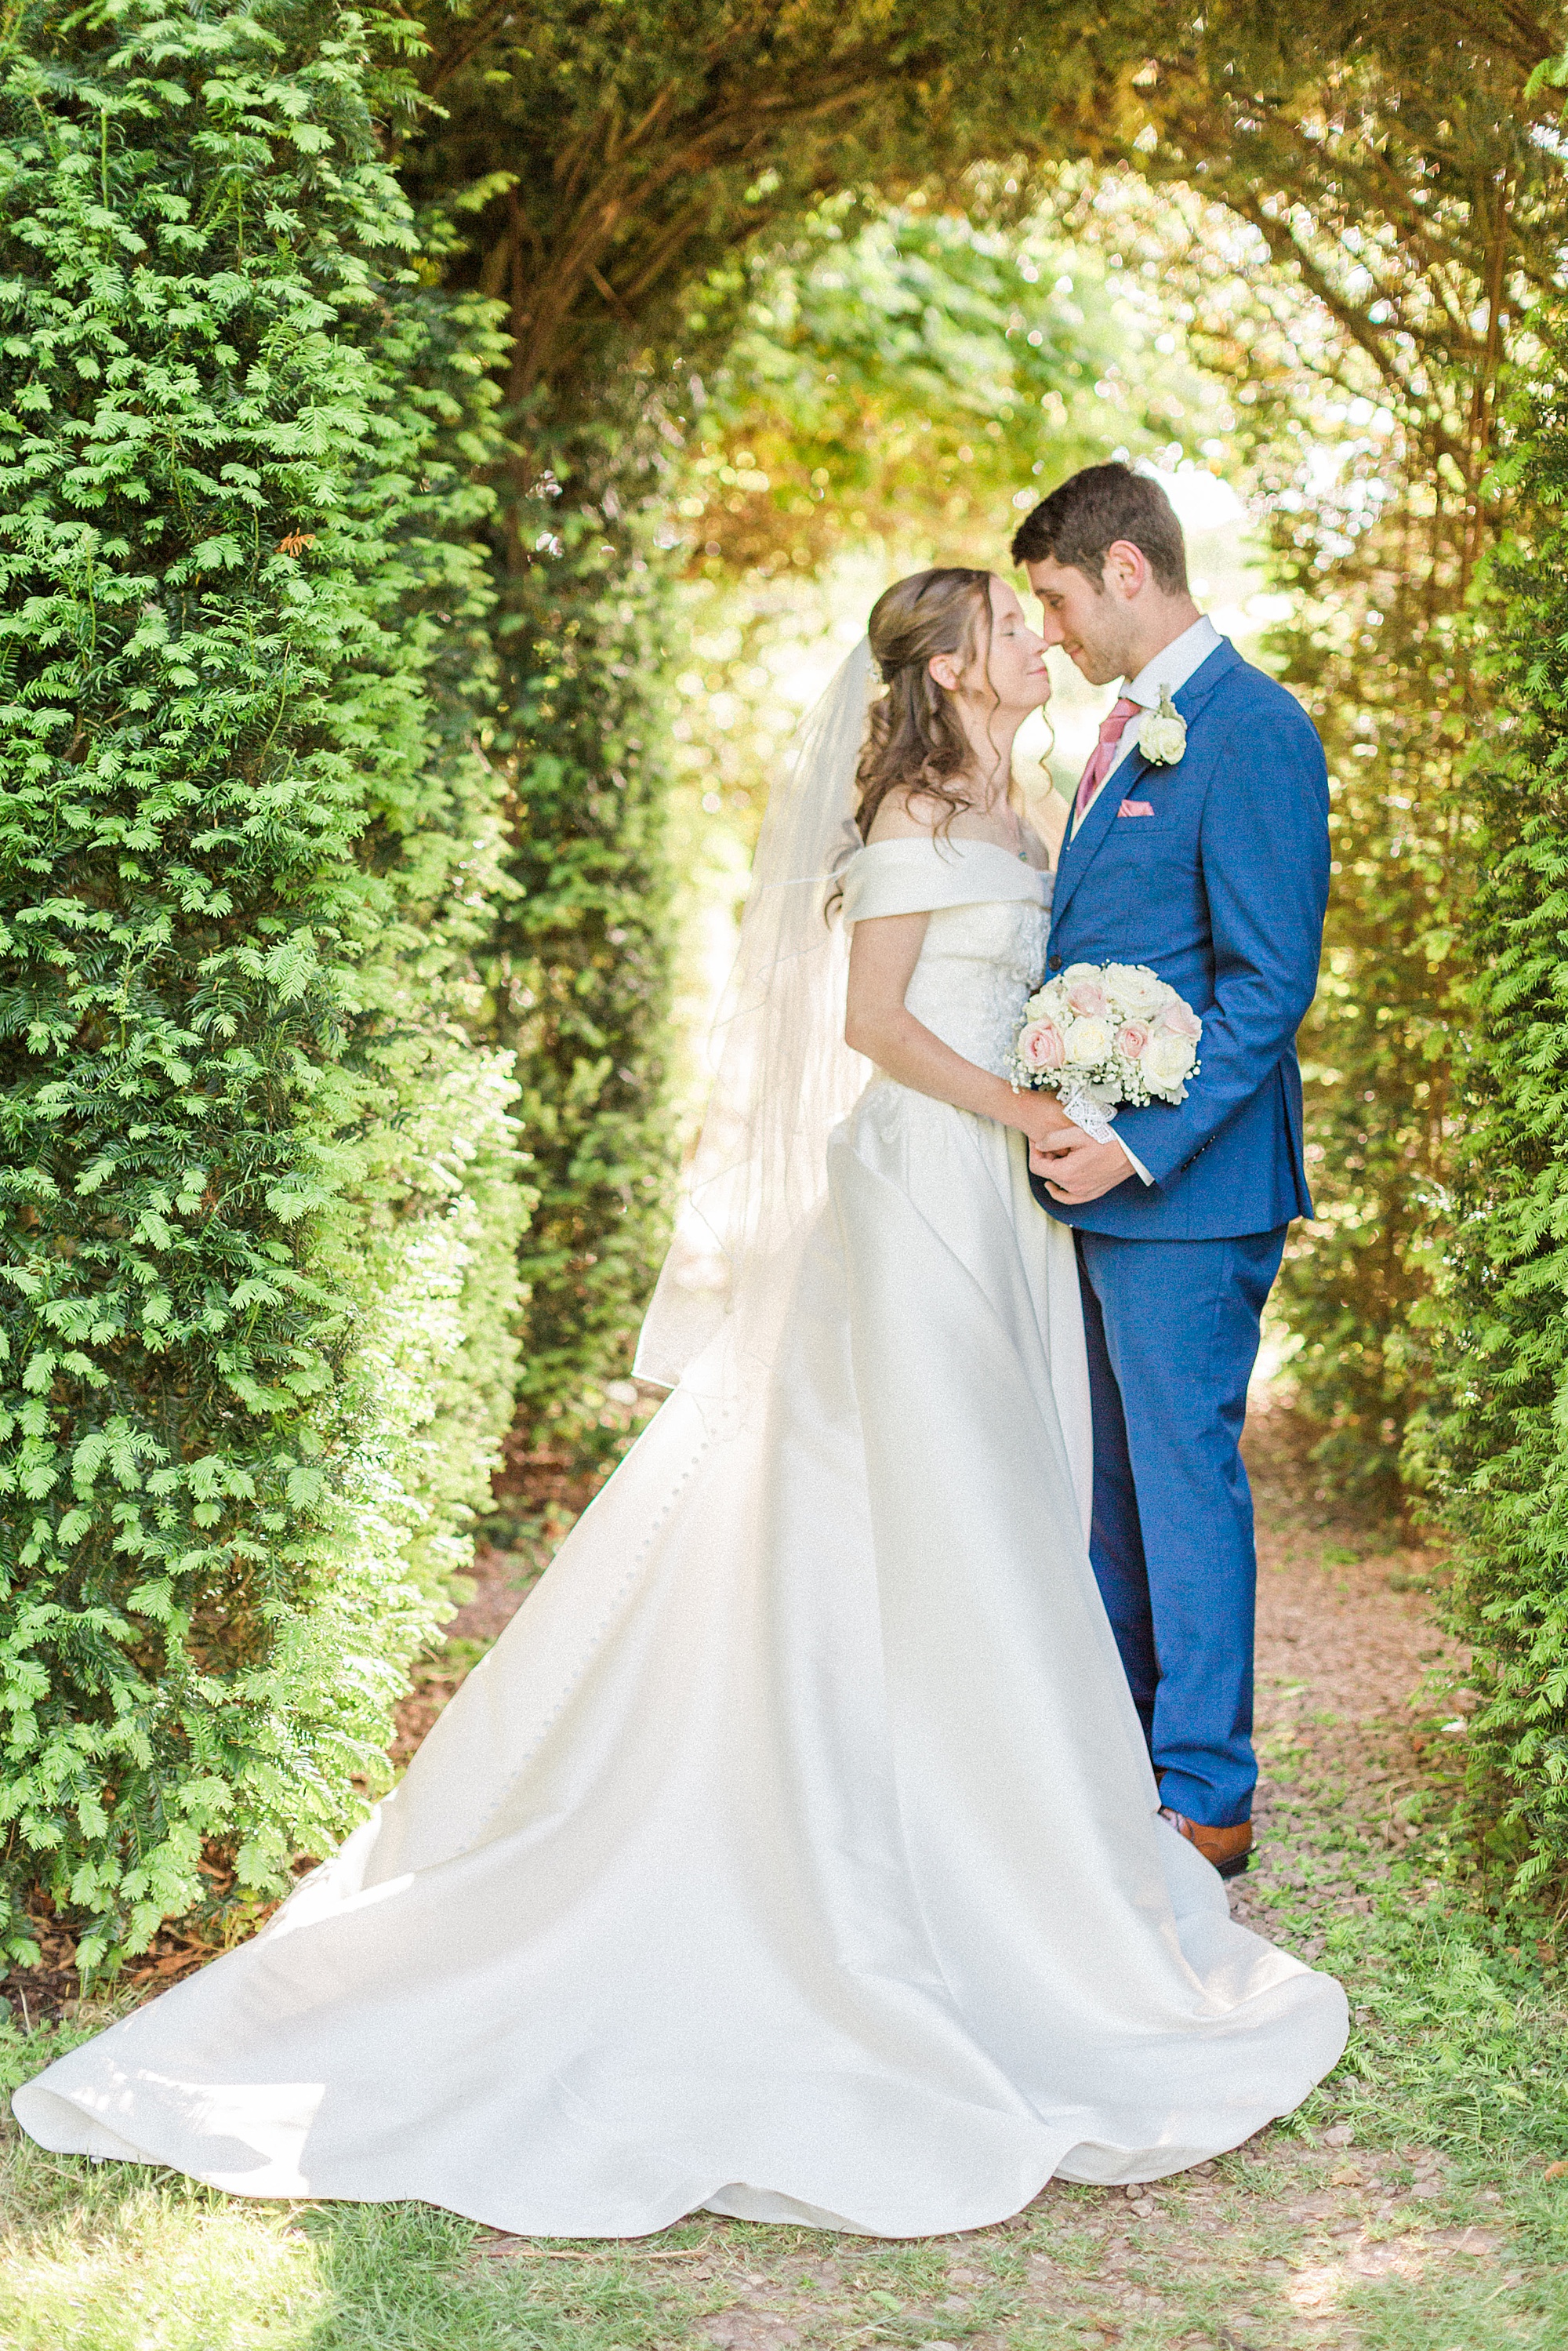 photo of a bride and groom facing in towards each other connected with their faces almost touching and bodies/hands together. They are lit from behind with golden sun and the archway is evergreen greenery